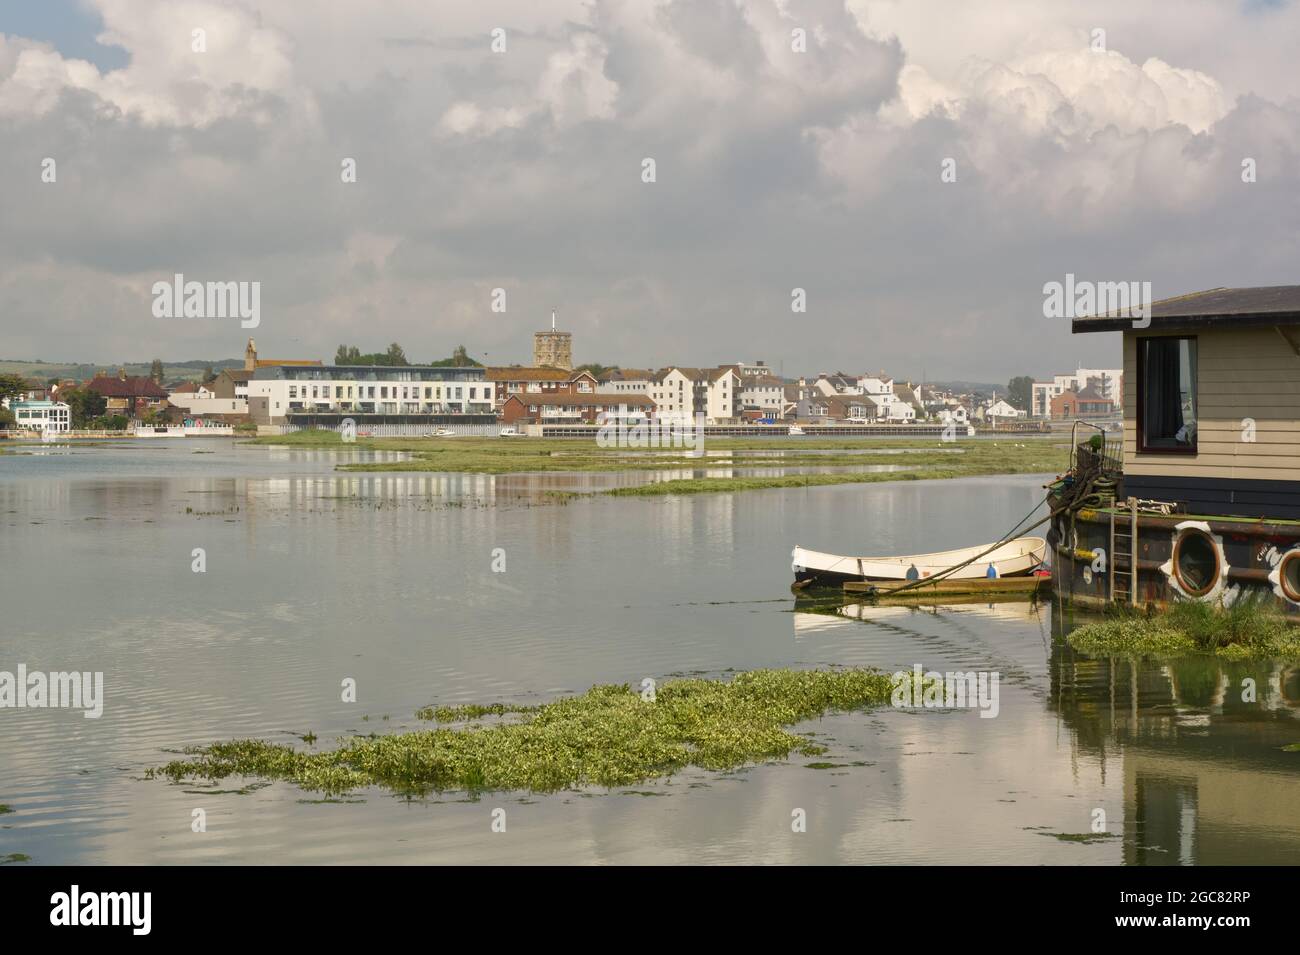 Houseboats moored on River Adur at Shoreham, West Sussex, England Stock Photo